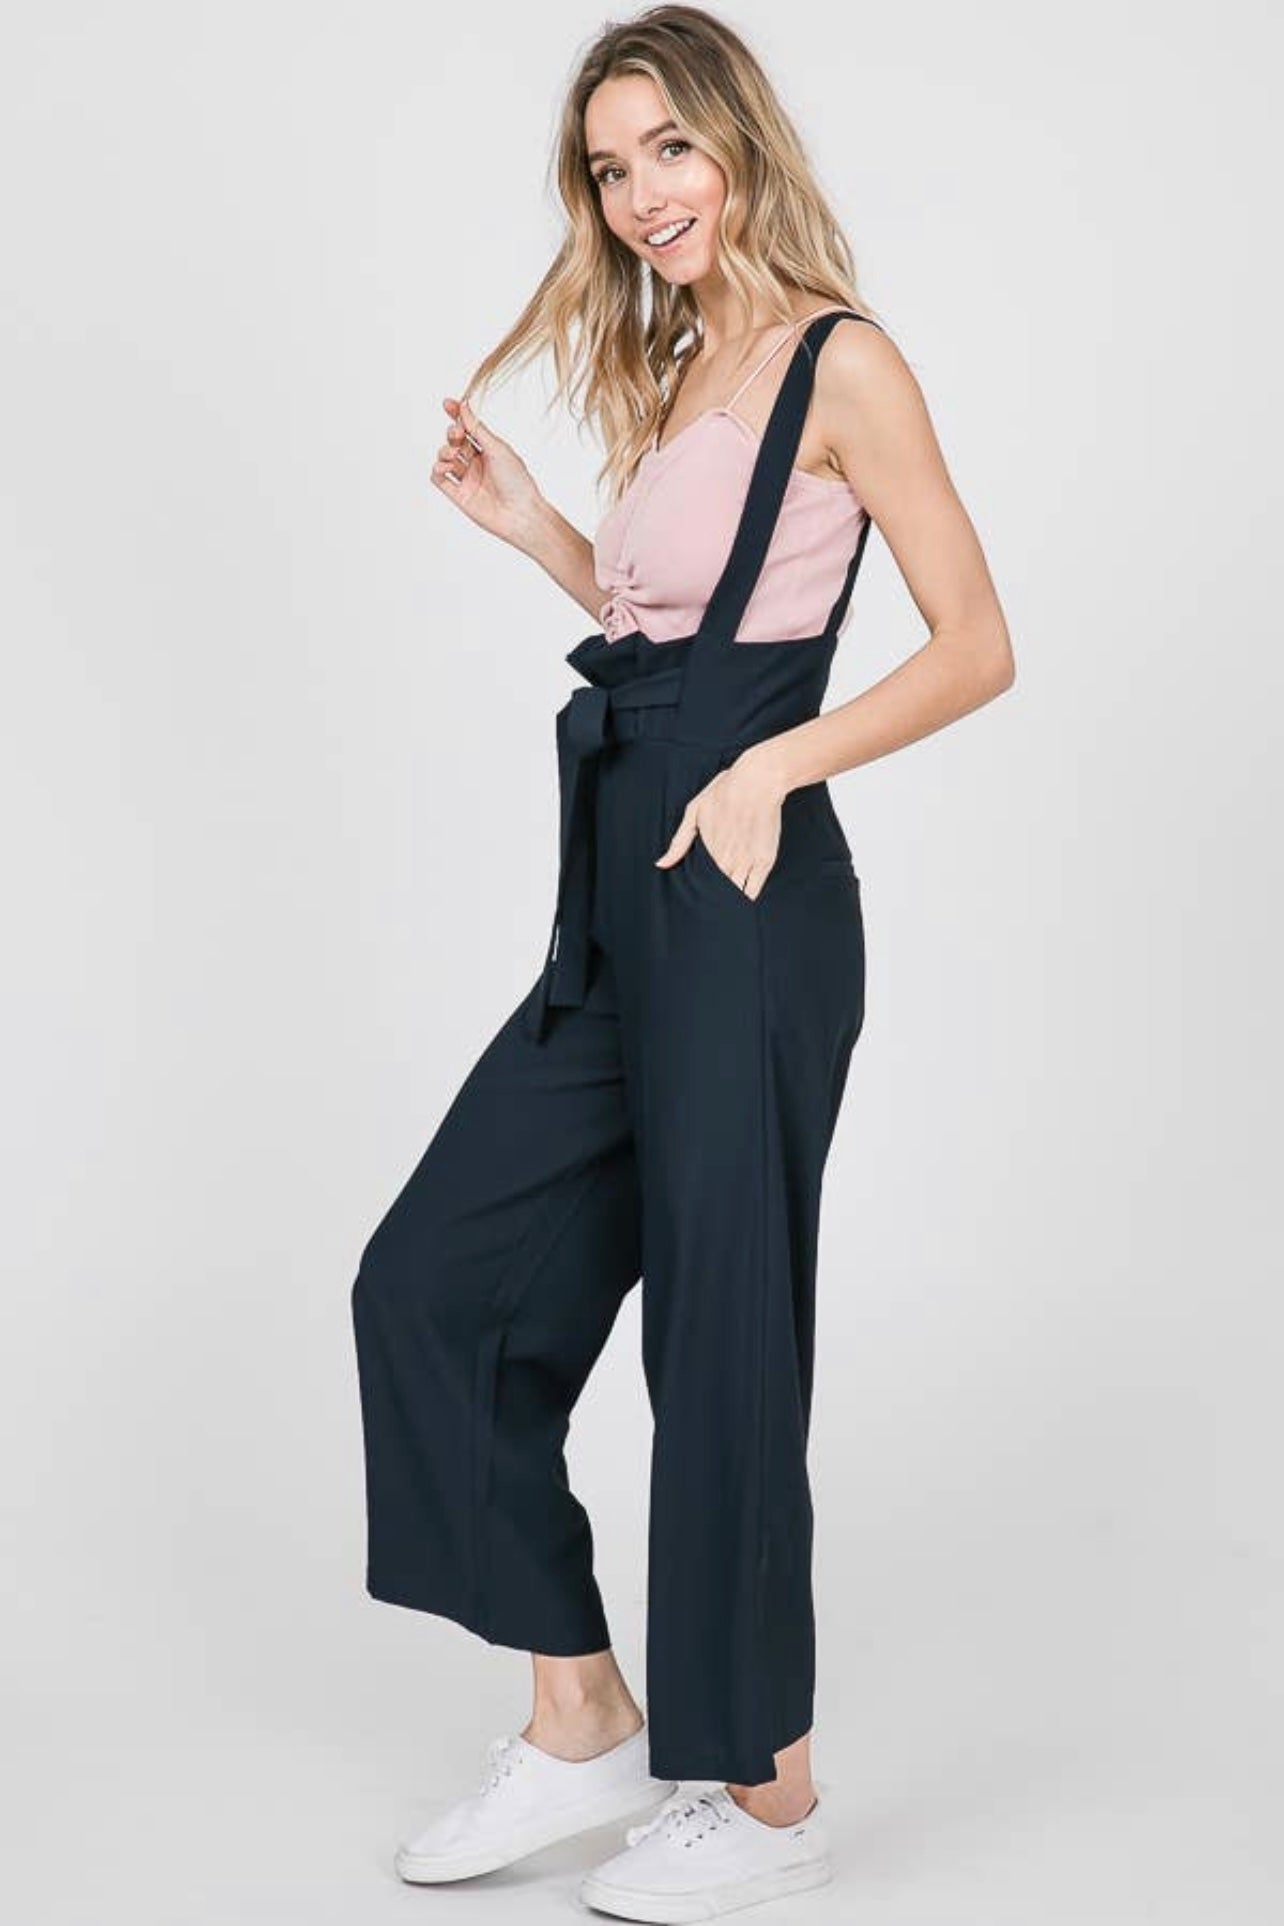 HIGH WAIST WIDE LEG PANTS WITH SUSPENDERS – The Hotpink Daisy